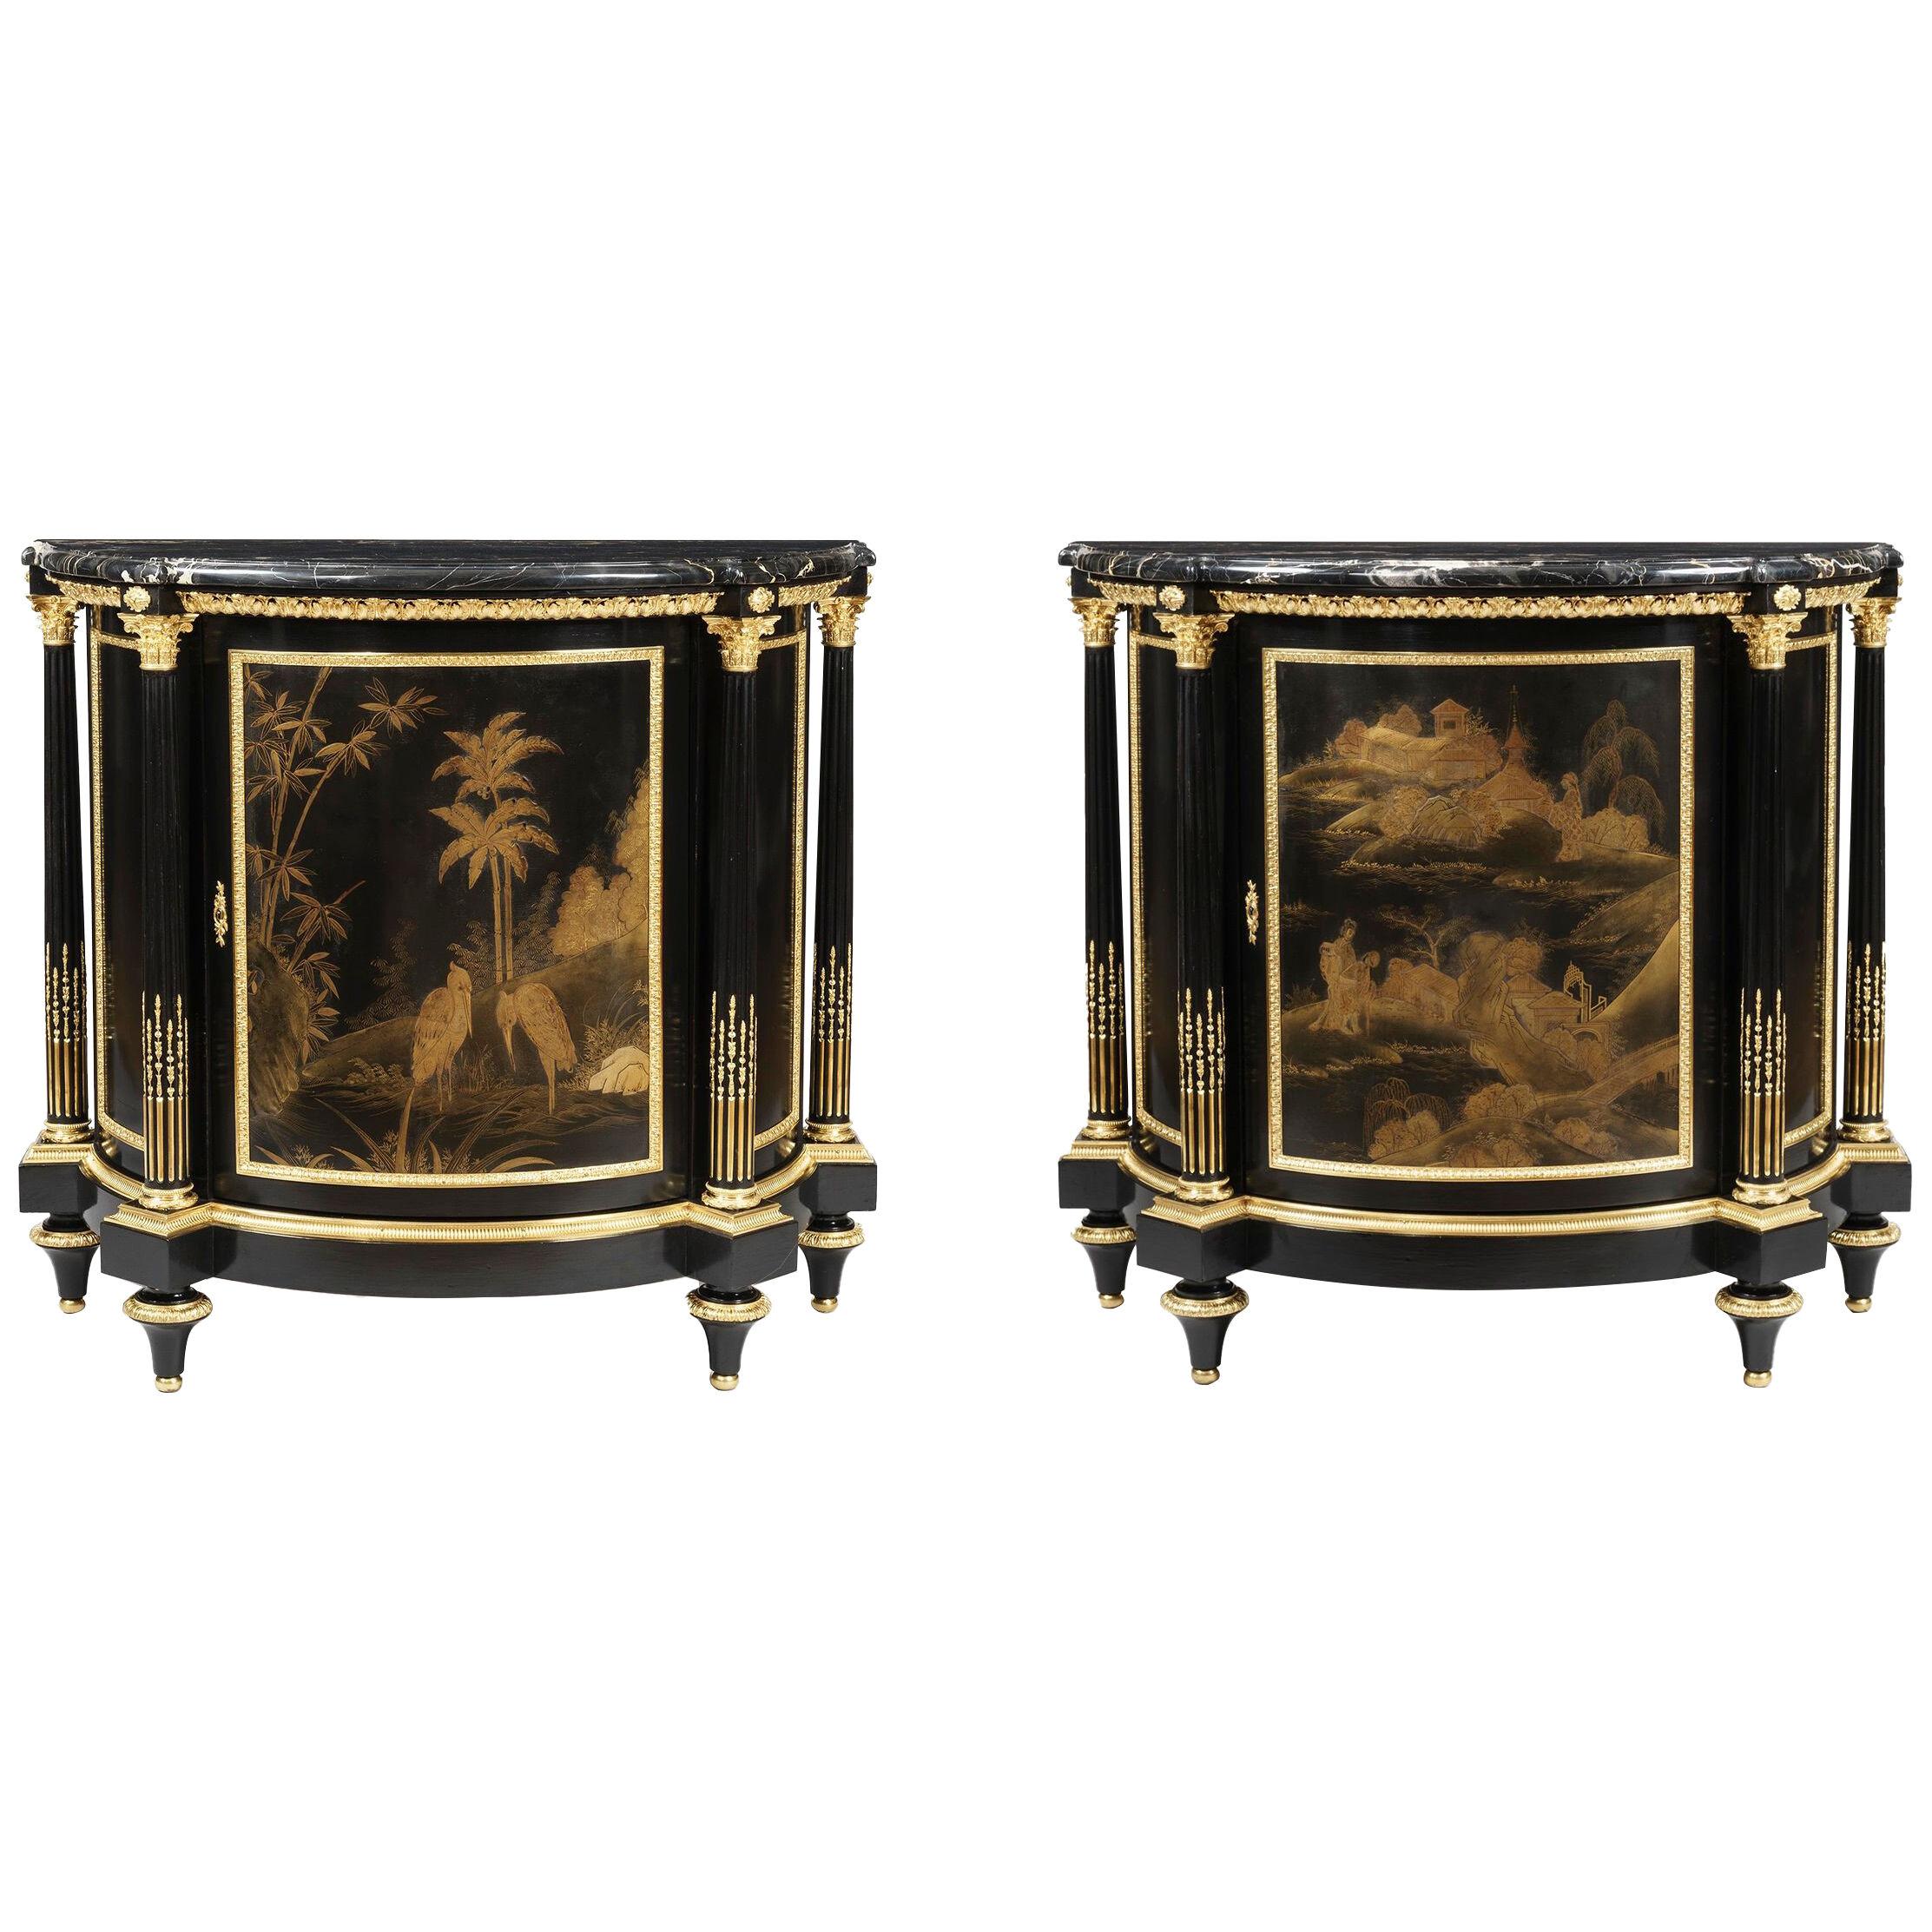 Pair of Lacquer Cabinets in the Louis XVI Manner